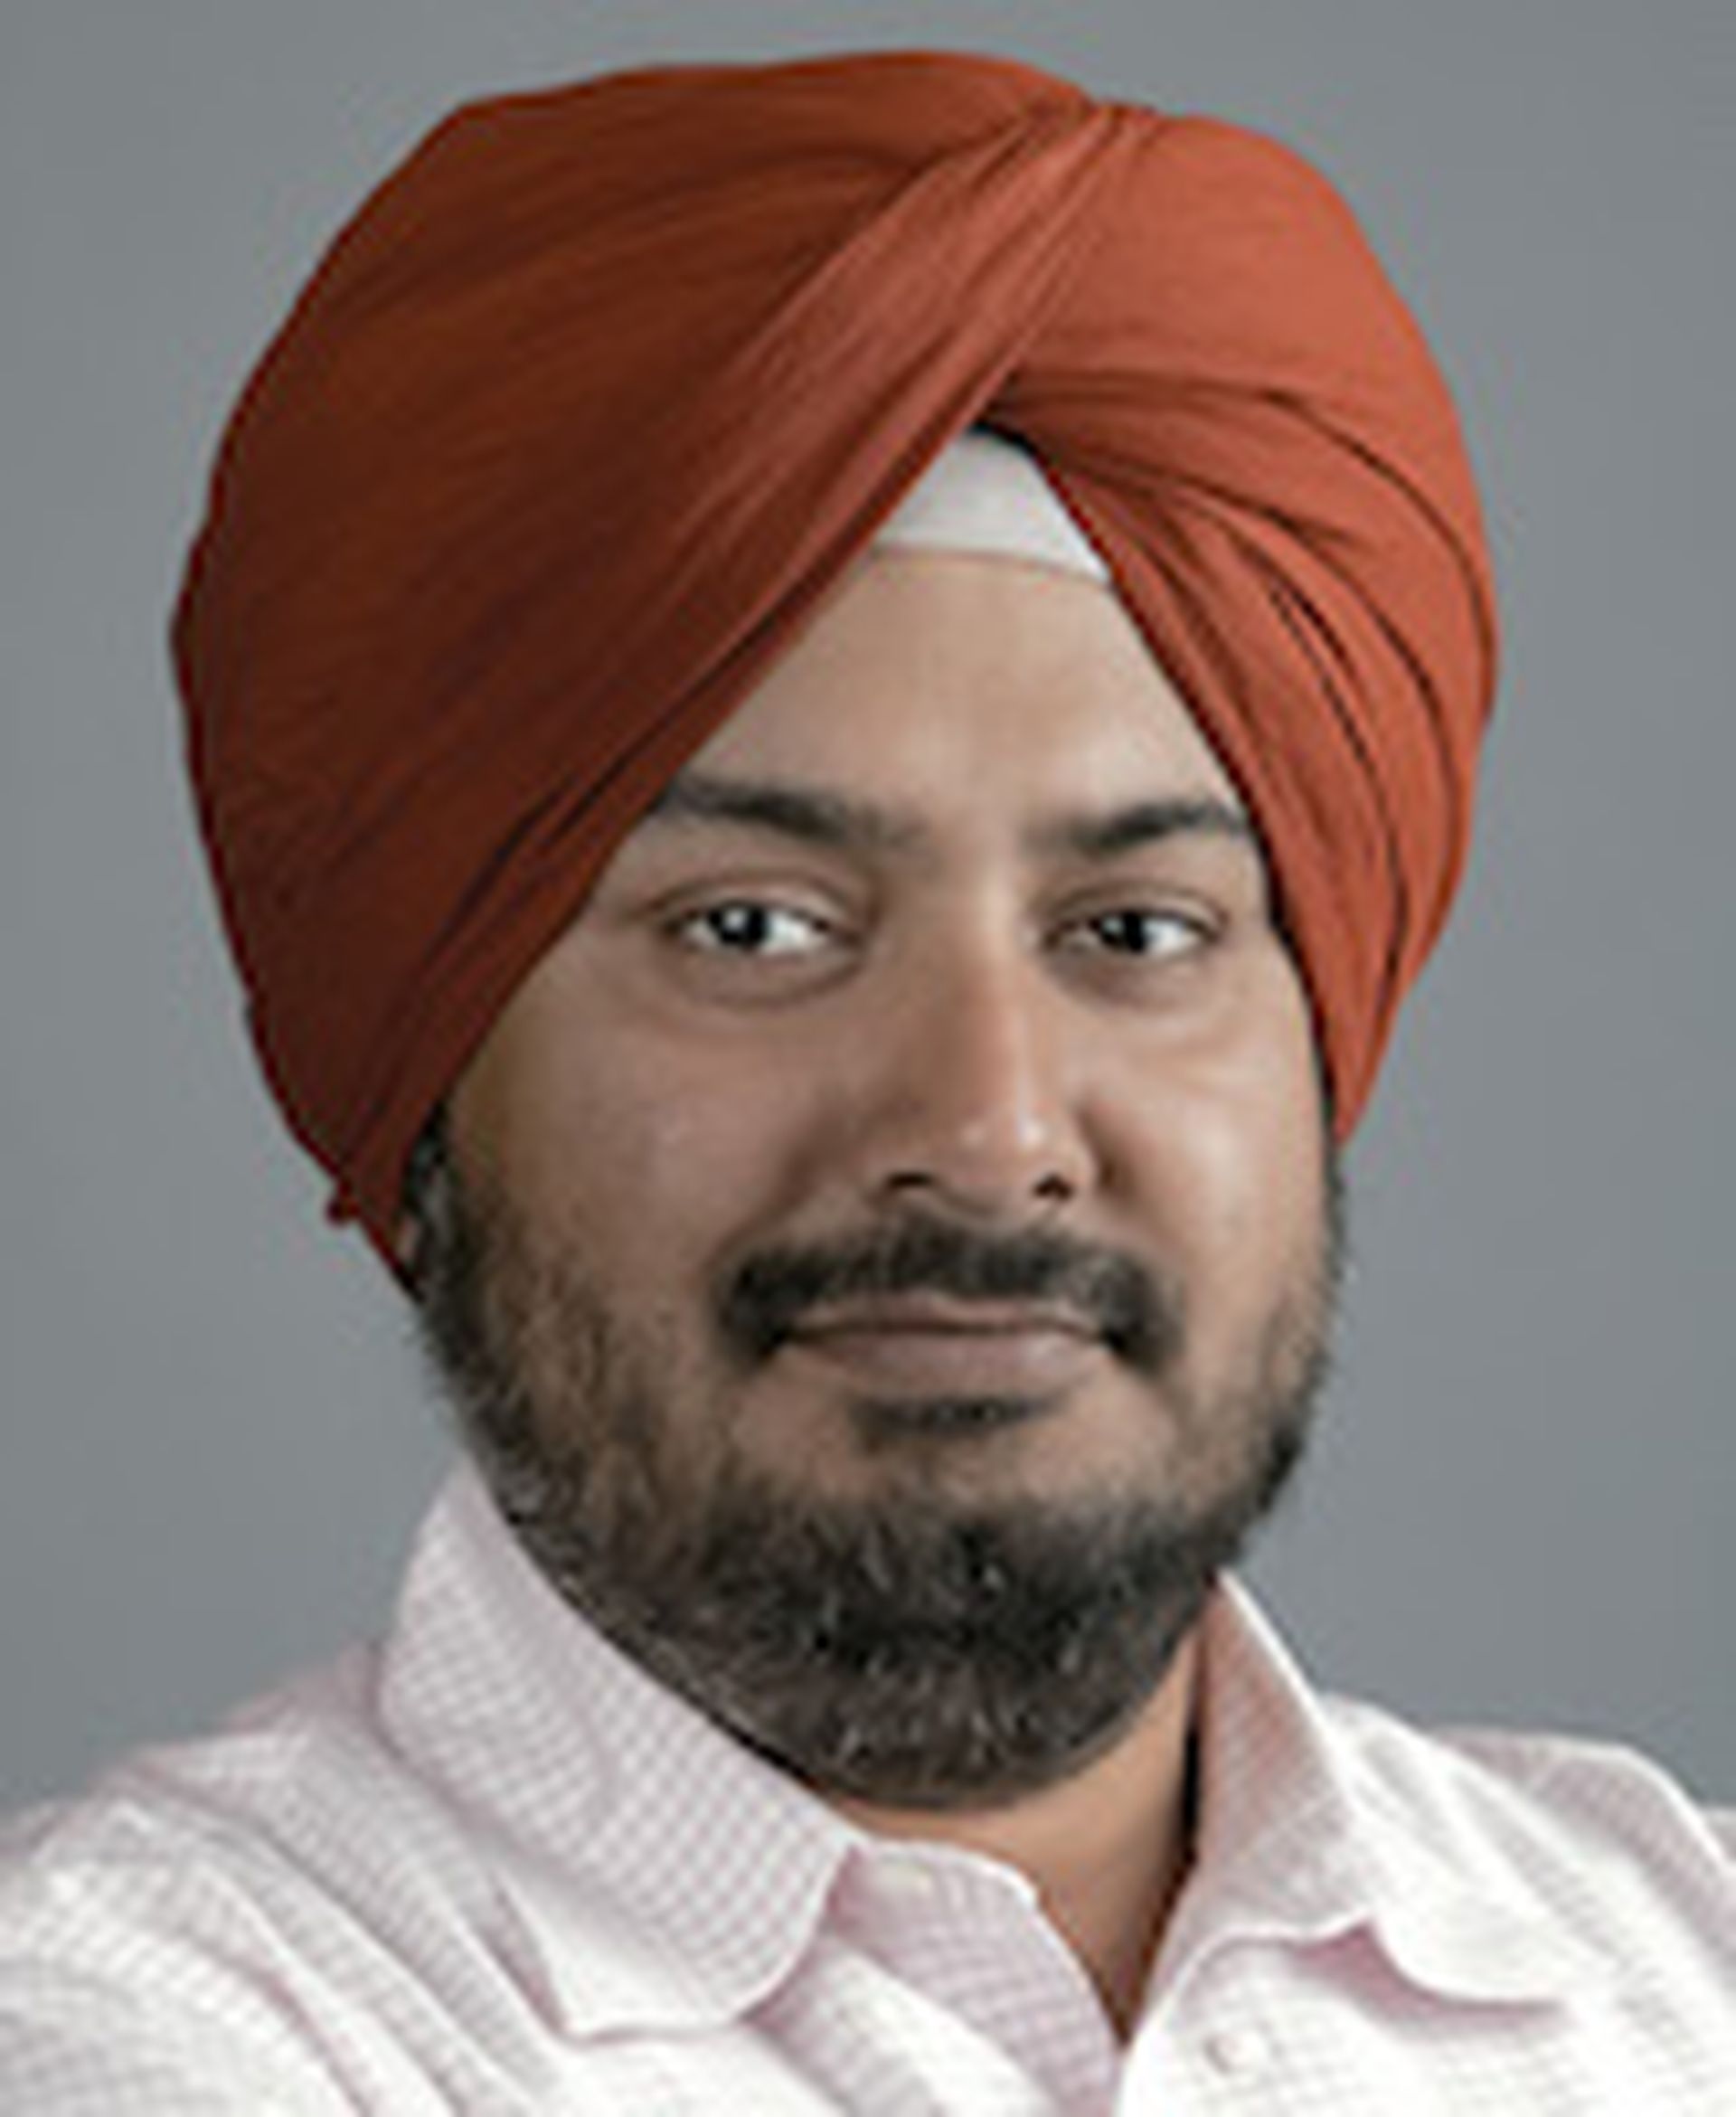 2020 Interview: Druva CEO Jaspreet Singh explains partner strategy, potential path to IPO